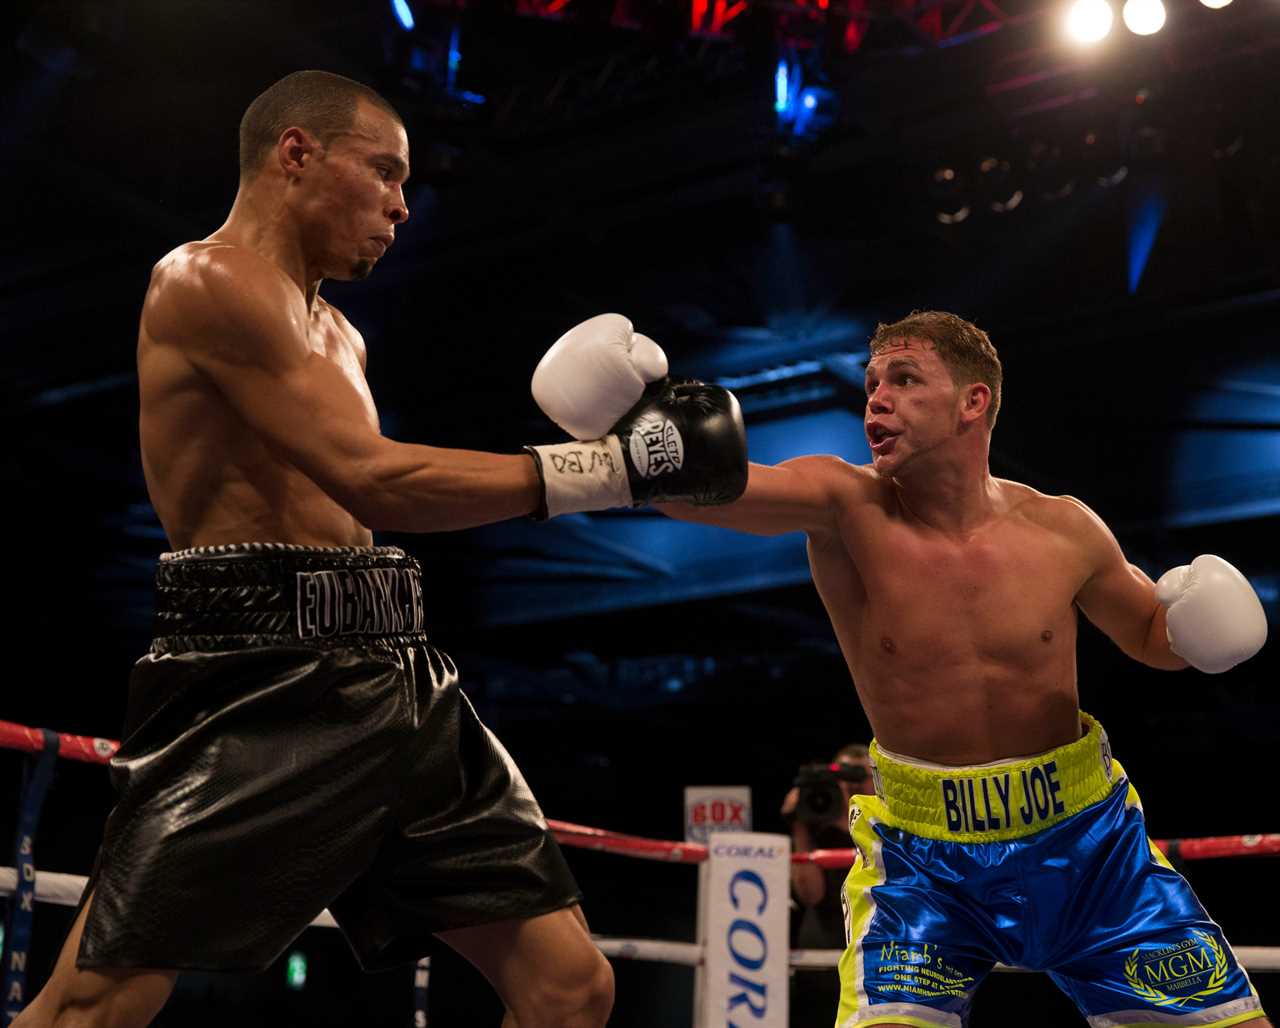 As bitter Chris Eubank Jr. rematch next year, Billy Joe Saunders is in negotiations for a boxing return in September.